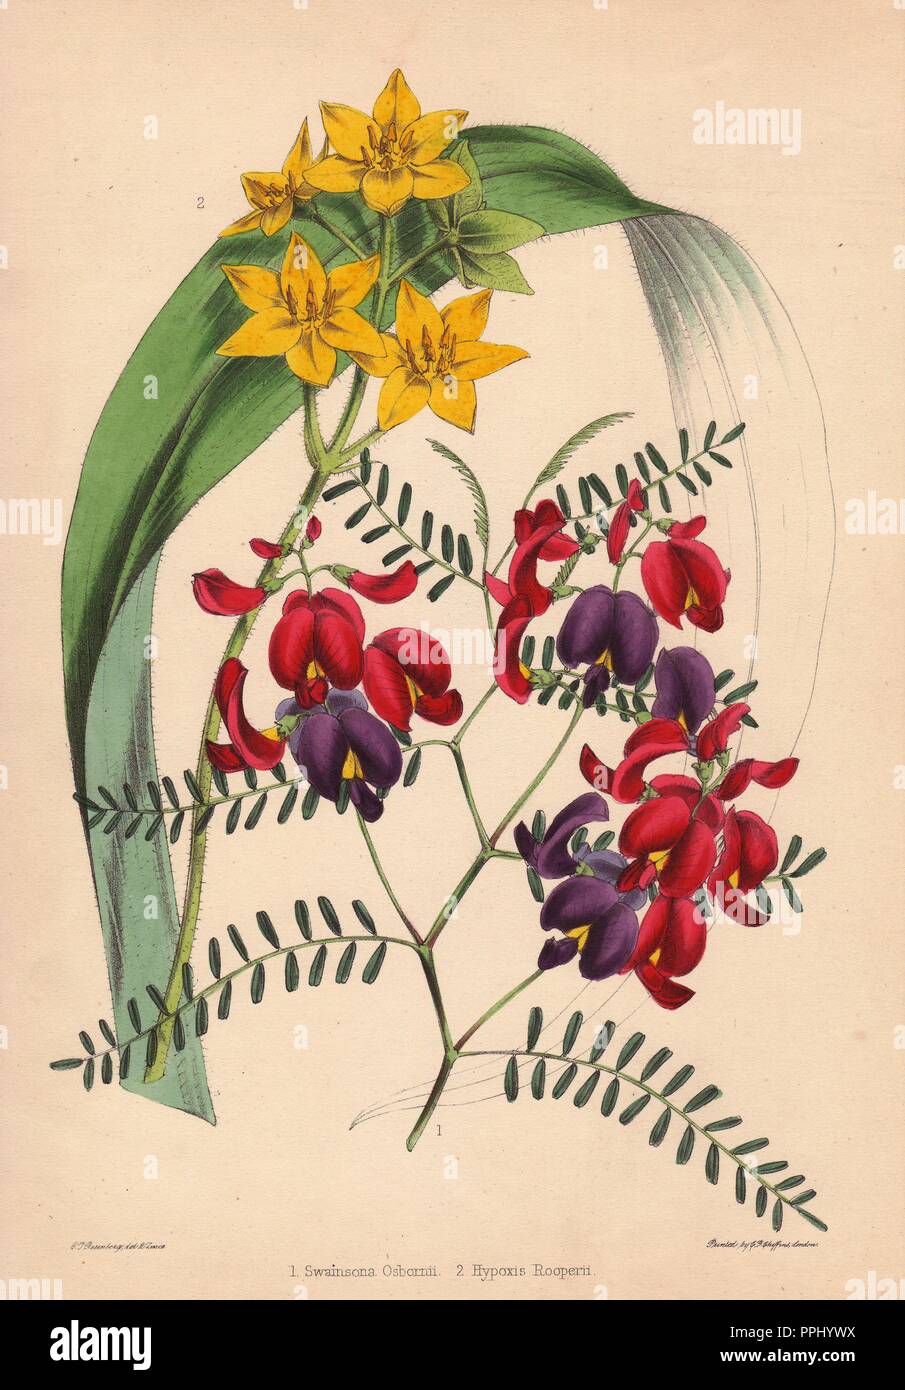 Purple-and-crimson-flowered Swainsona osbornii and and yellow-flowered Hypoxis rooperii. . Drawn and zincographed by C. T. Rosenberg, for Thomas Moore's 'The Garden Companion and Florists' Guide,' 1852, published by Charles Frederick Cheffins.. . C.T. Rosenberg drew and engraved many botanicals for Moore's 'The Gardener's Magazine of Botany' and W.J. Hooker's 'Curtis's Botanical Magazine' in the middle of the 19th century. Moore (1821-1887) was the curator of the Botanic Garden, Chelsea, from 1847 until his death. Stock Photo